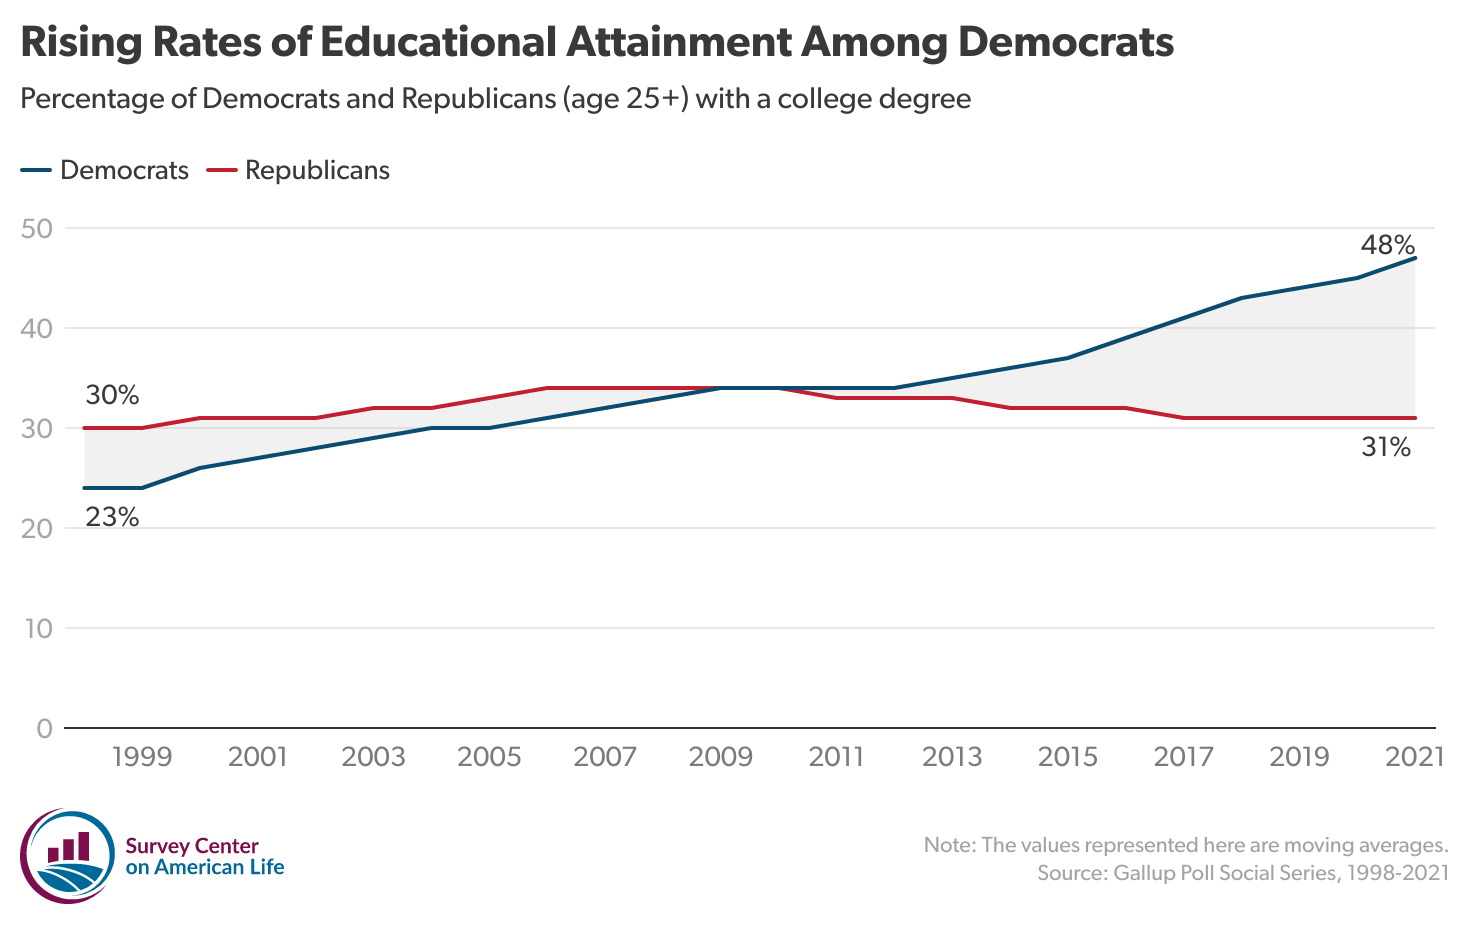 Chart showing percentage of Democrats and Republicans ages 25 and older with a college degree from 1999 to 2021